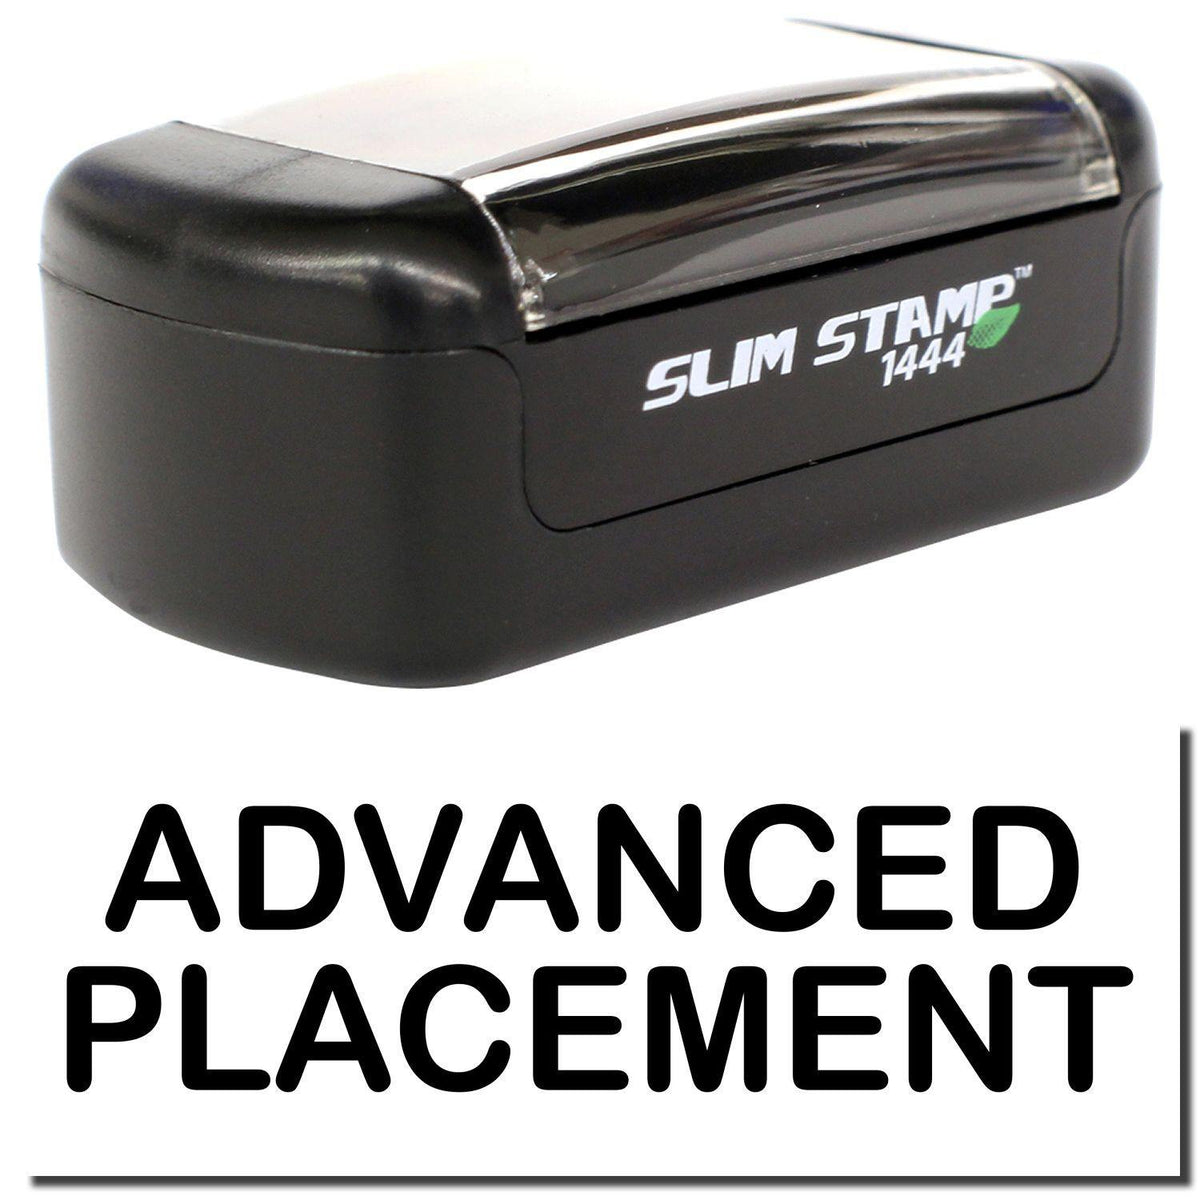 A stock office pre-inked stamp with a stamped image showing how the text &quot;ADVANCED PLACEMENT&quot; is displayed after stamping.